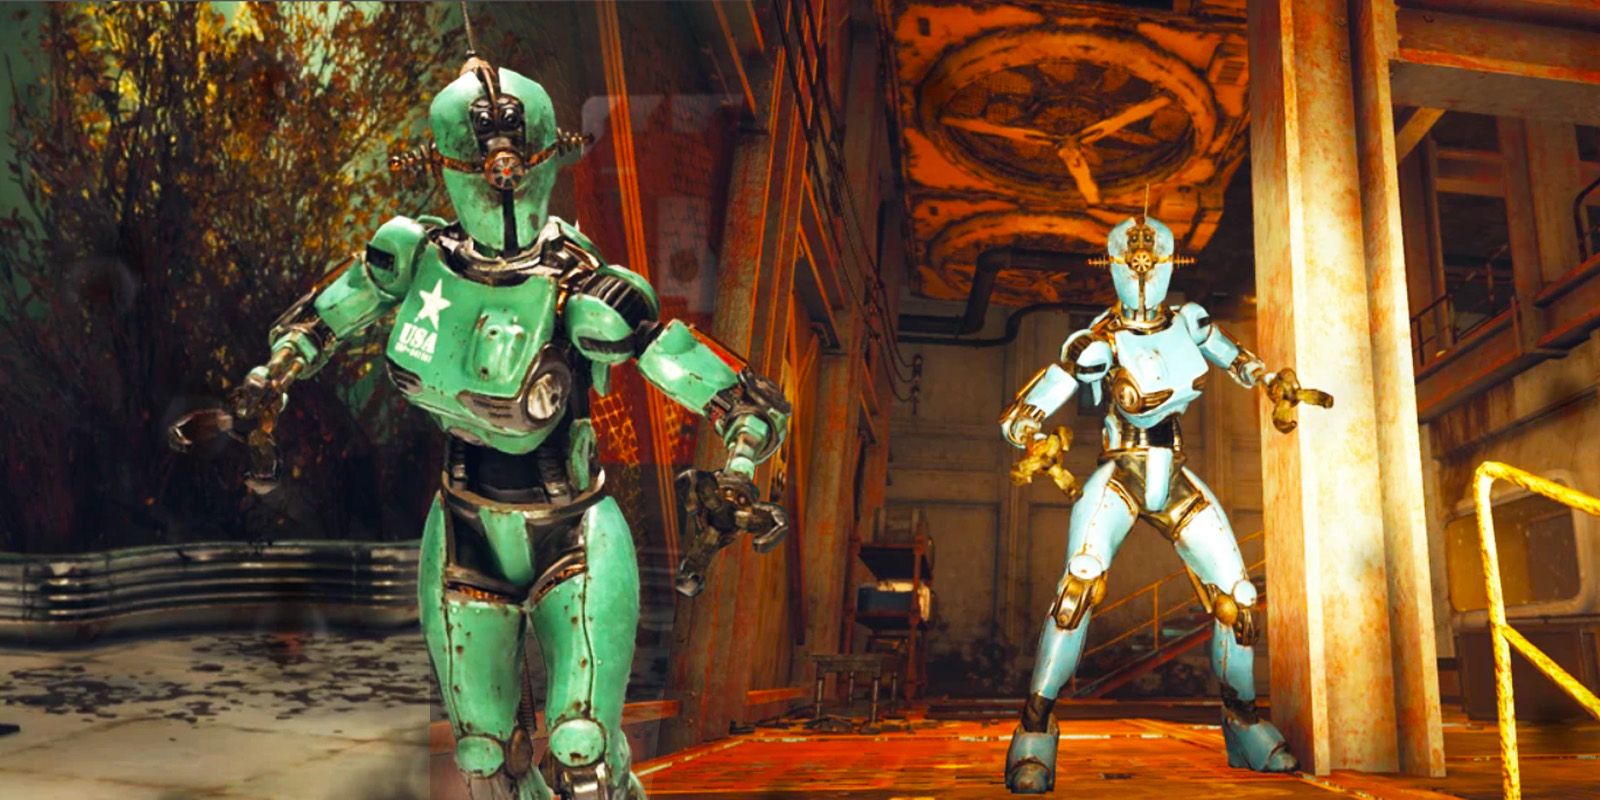 Two Assaultrons from Fallout 76 approach the player, ready to attack.